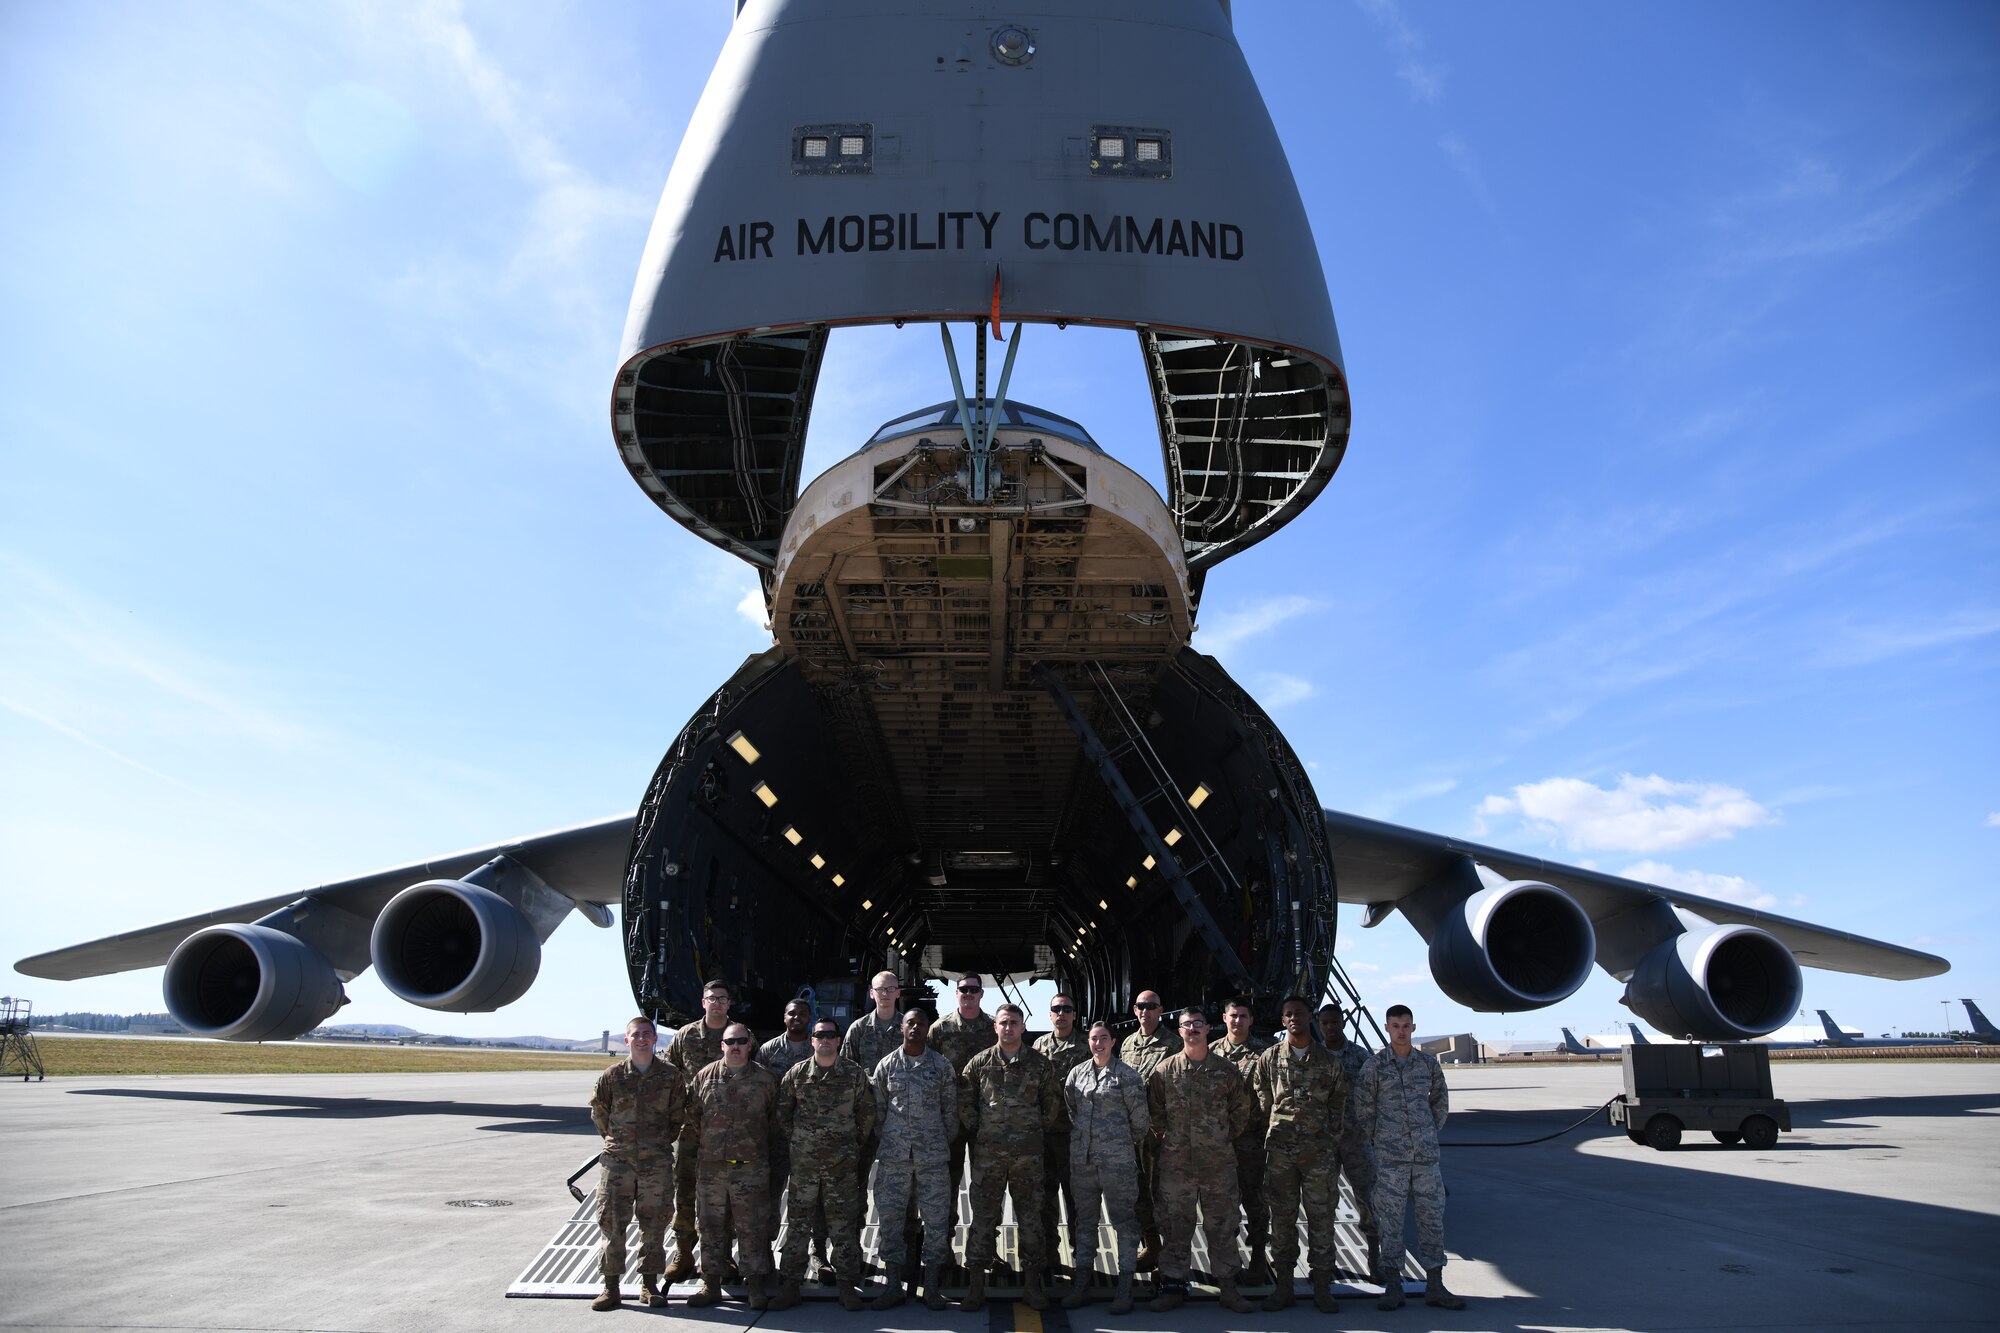 Airmen from the 436th Maintenance Squadron and 436th Aircraft Maintenance Squadron pose for a photo on the forward ramp of a C-5M Super Galaxy, Sept. 24, 2019, at Fairchild AFB, Wash., during Mobility Guardian 2019. Exercise Mobility Guardian is Air Mobility Command's premier large-scale mobility exercise. Through robust and relevant training, Mobility Guardian improves the readiness and capabilities of Mobility Airmen to deliver rapid global mobility and builds a more lethal and ready Air Force.(U.S. Air Force photo by TSgt Esteban Esquivel).